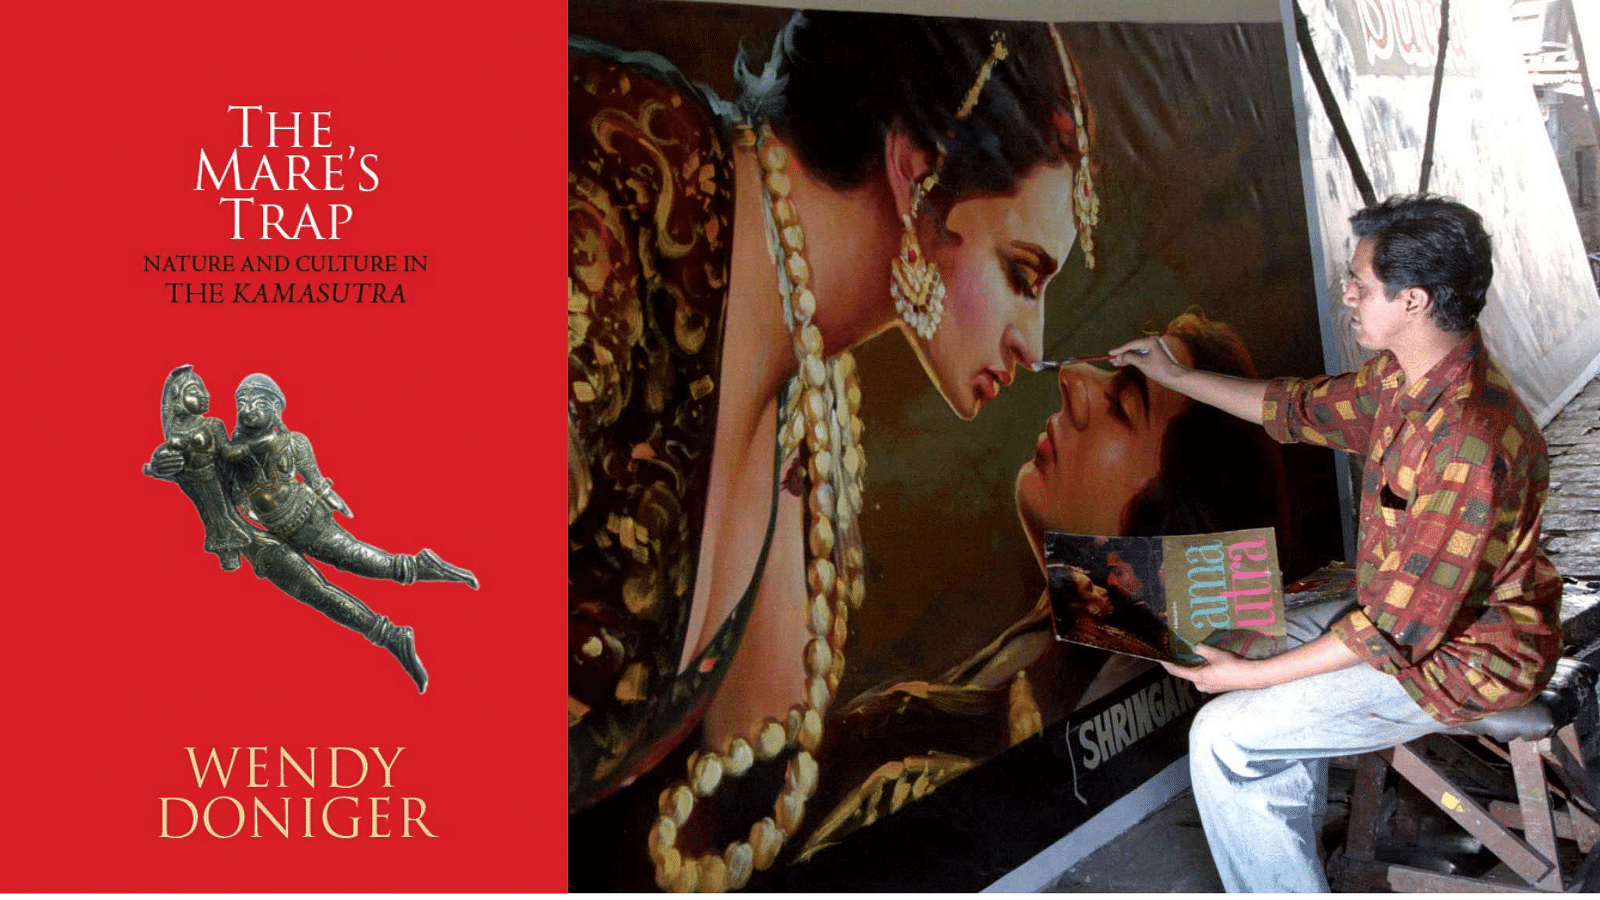 Review: Controversial Author Wendy Doniger Revisits the Kamasutra